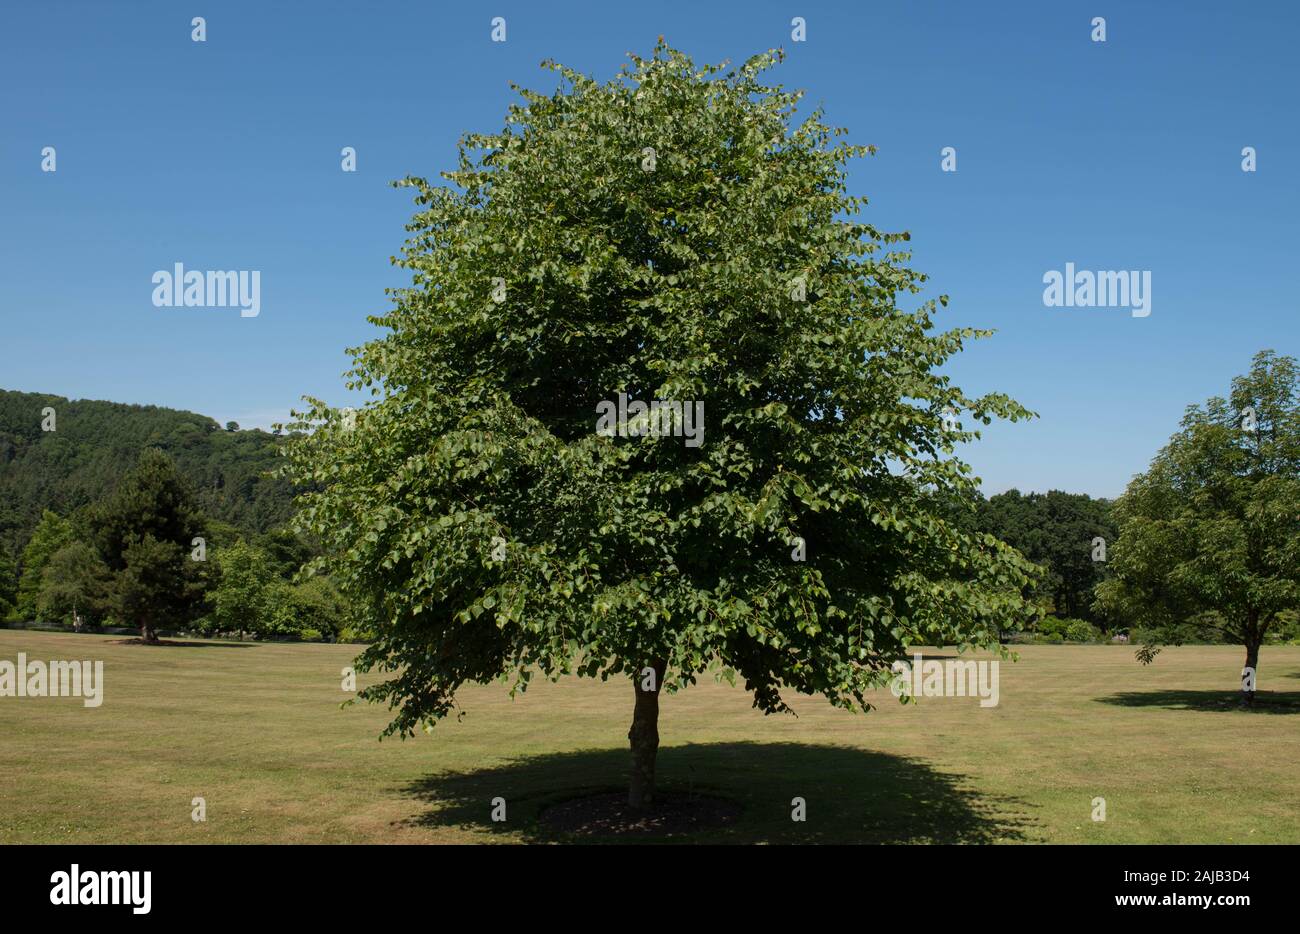 Spring Foliage of a Small Leaved Linden or Lime Tree (Tilia cordata) with a Bright Blue Sky Background in a Park in Rural Devon, England, UK Stock Photo